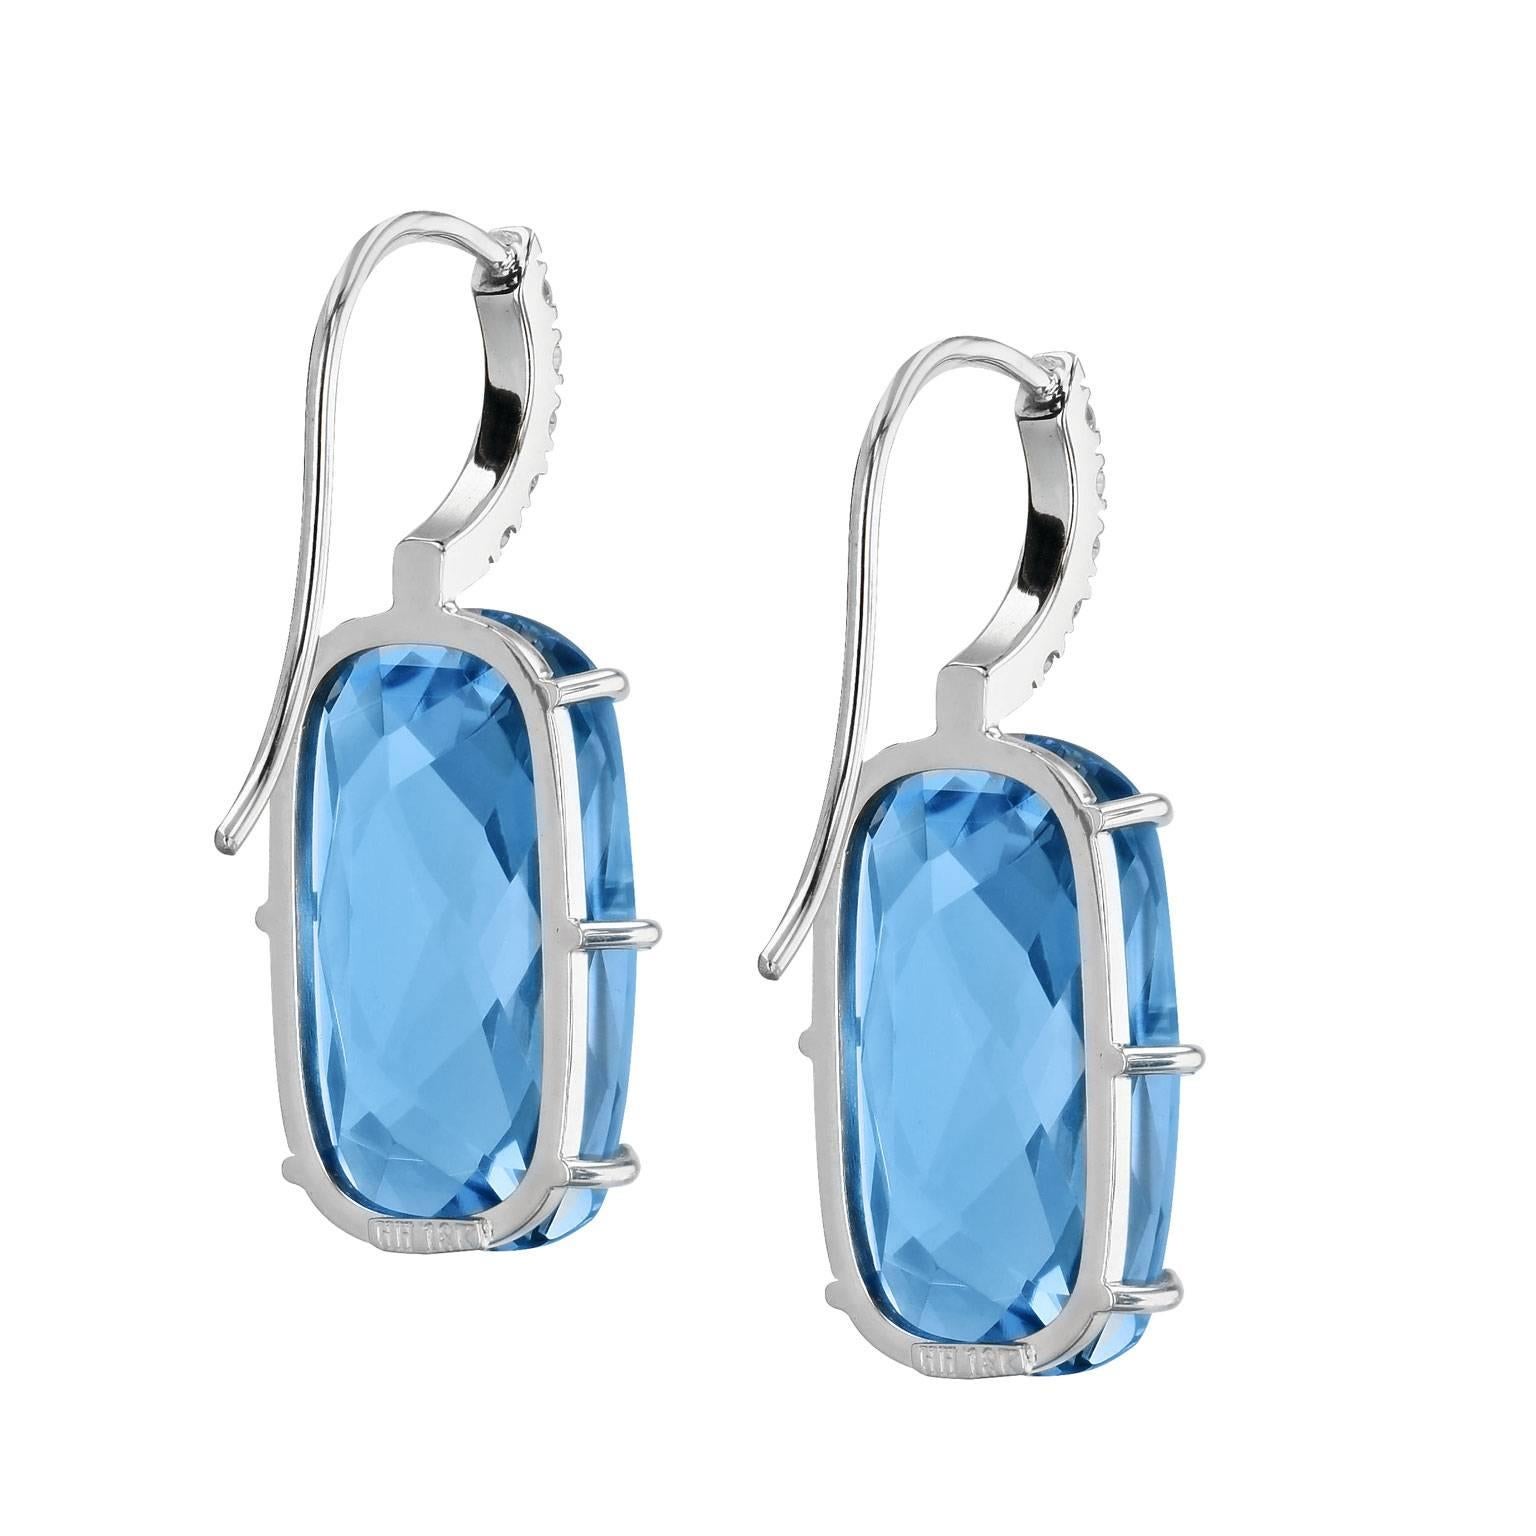 Oval Cut 20.34 Carat Blue Topaz with Diamond Pave Earrings in 18 Karat White Gold 